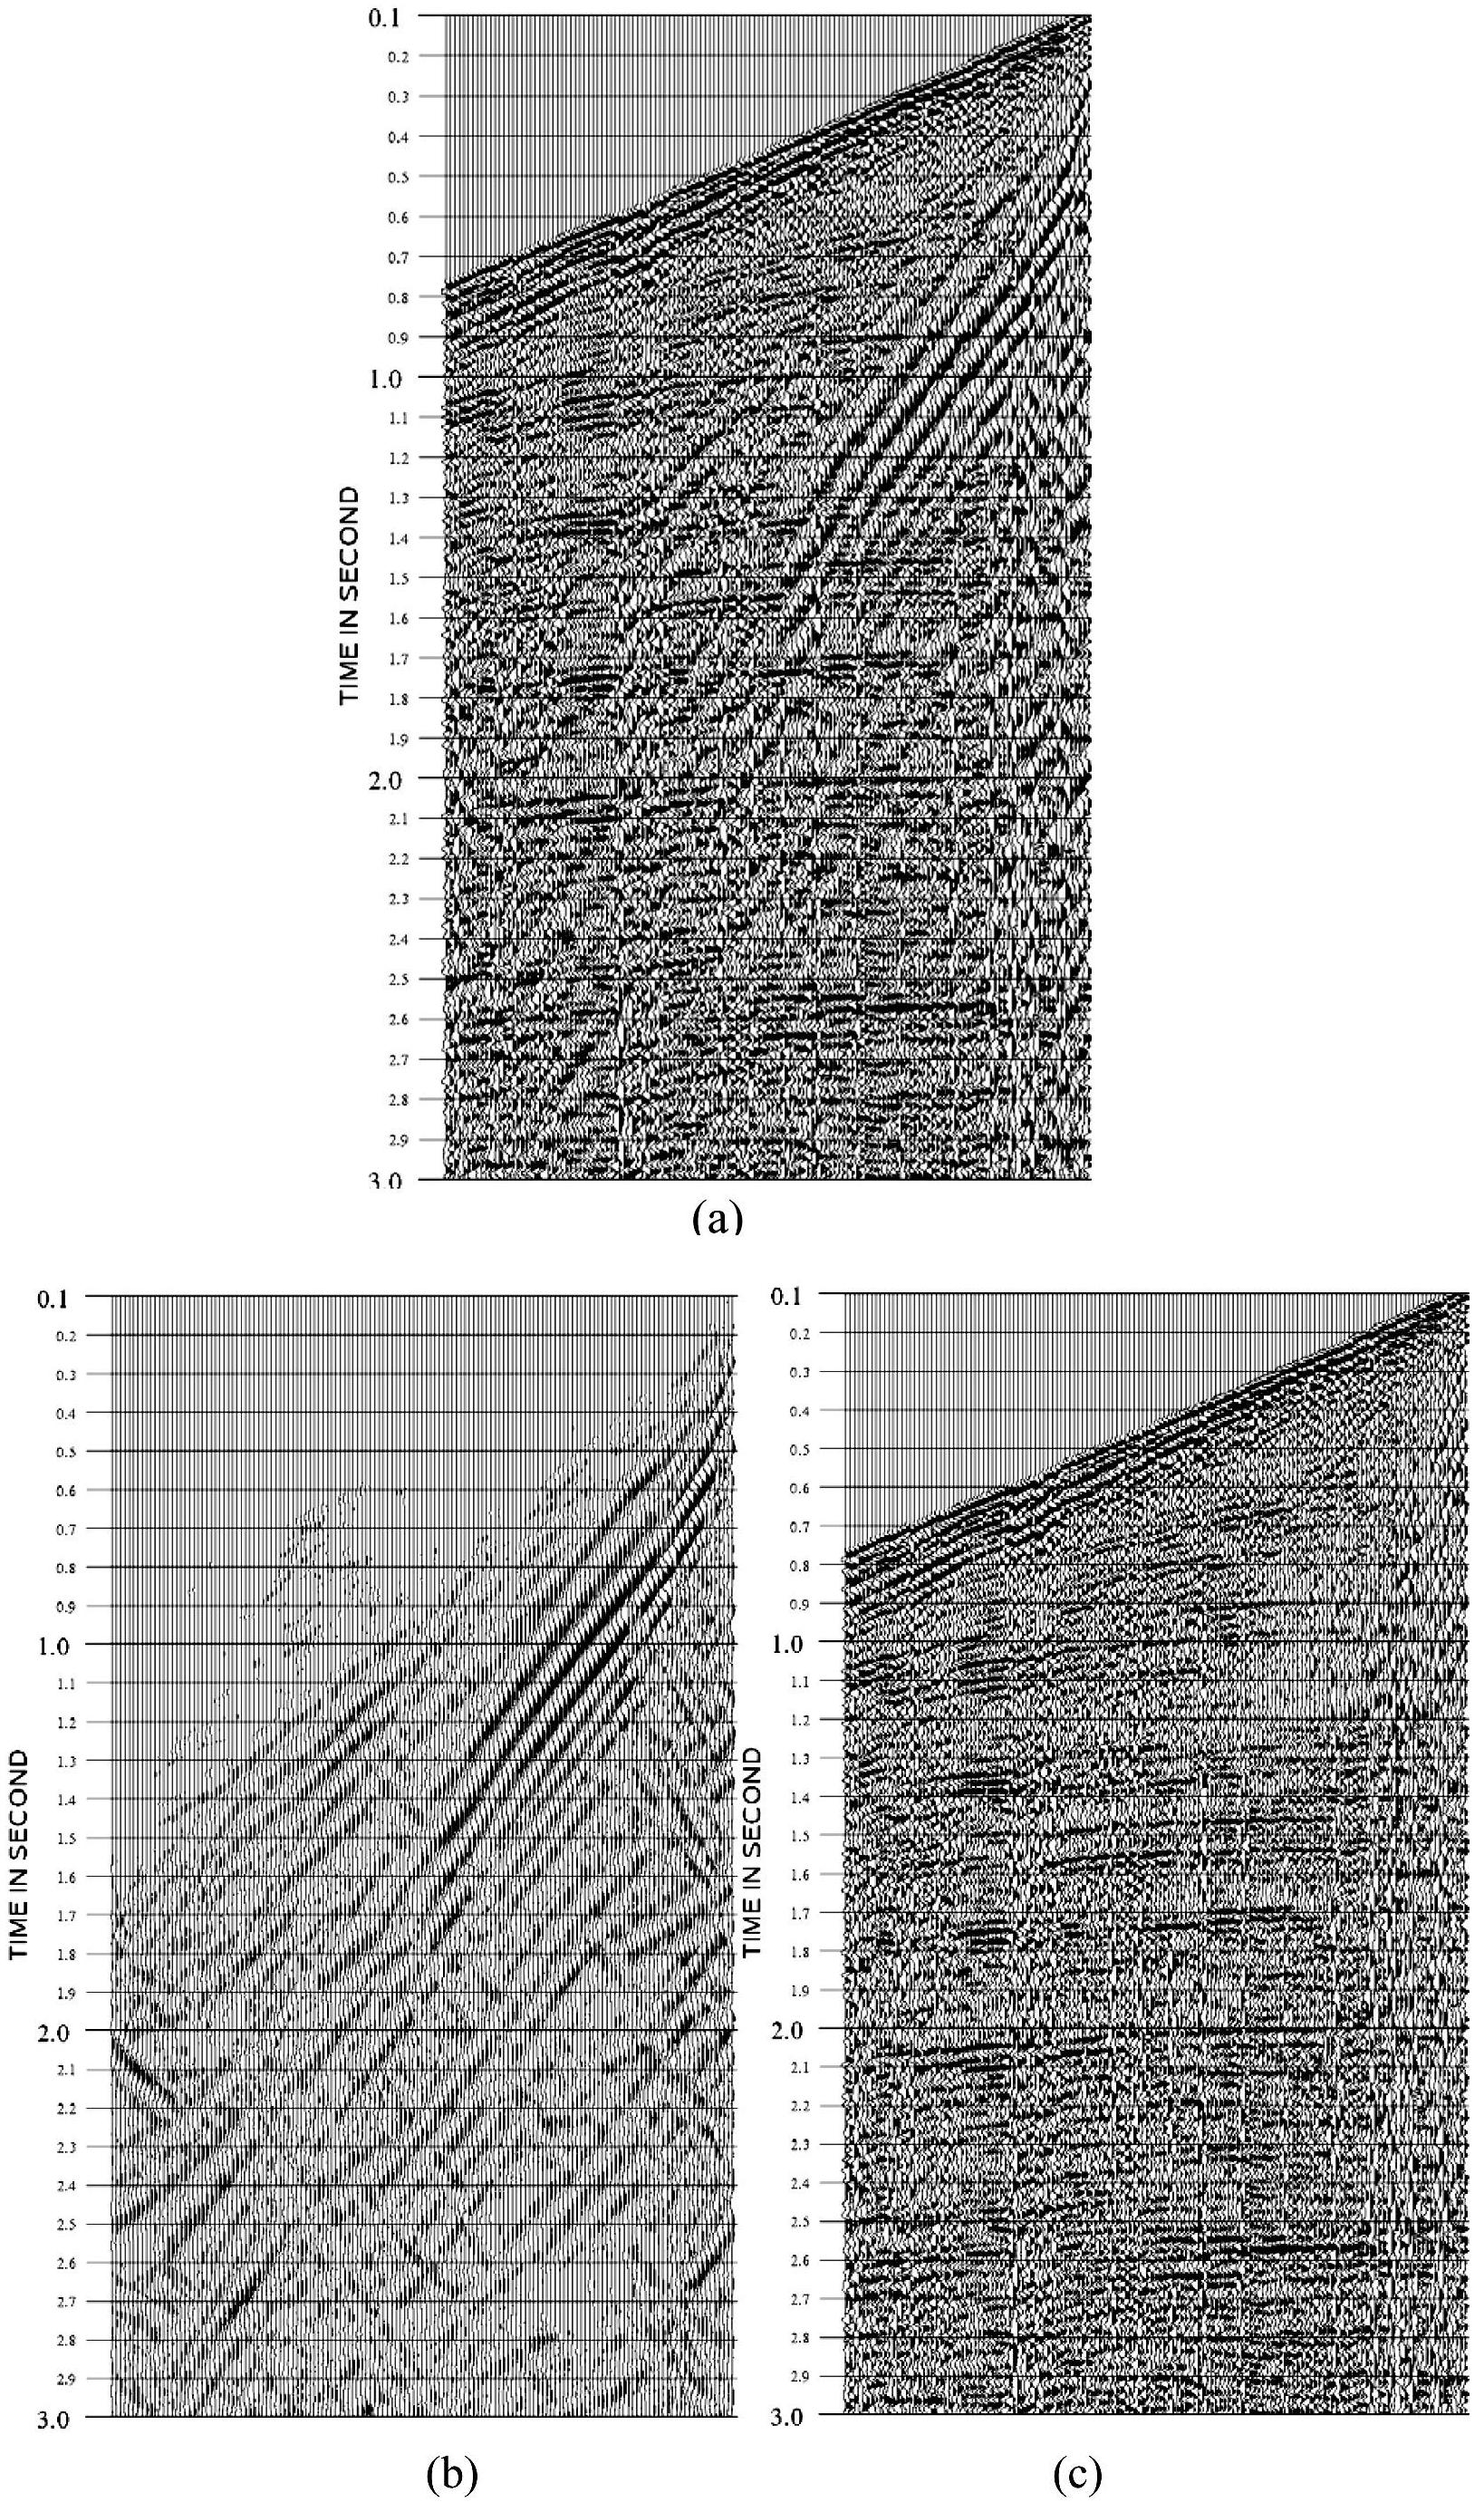 Regular linear interference suppressing method based on polynomial fitting